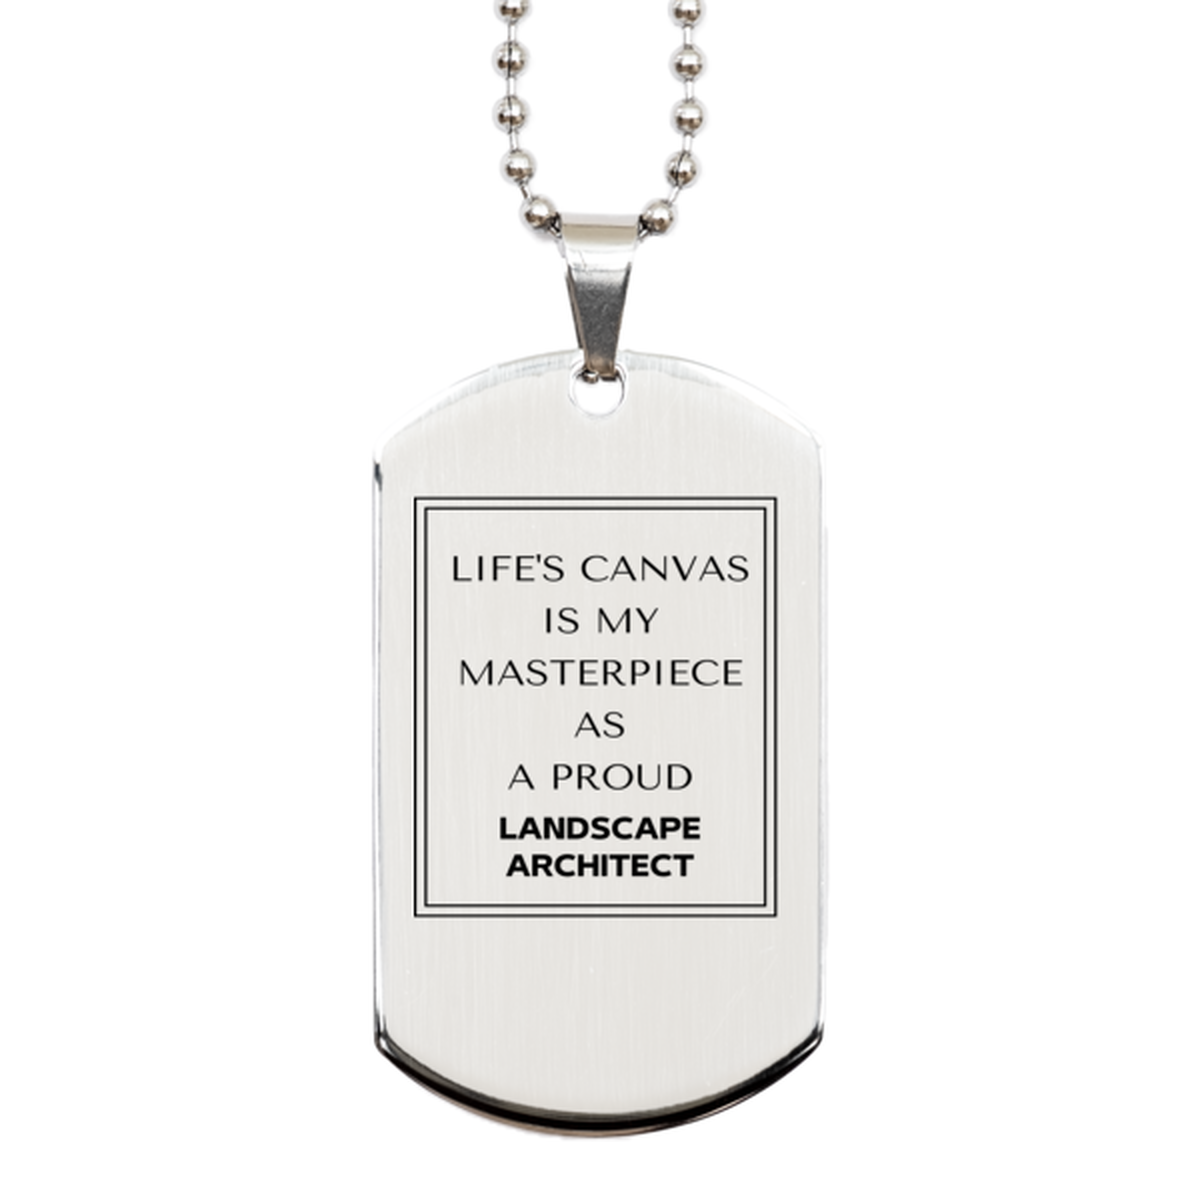 Proud Landscape Architect Gifts, Life's canvas is my masterpiece, Epic Birthday Christmas Unique Silver Dog Tag For Landscape Architect, Coworkers, Men, Women, Friends